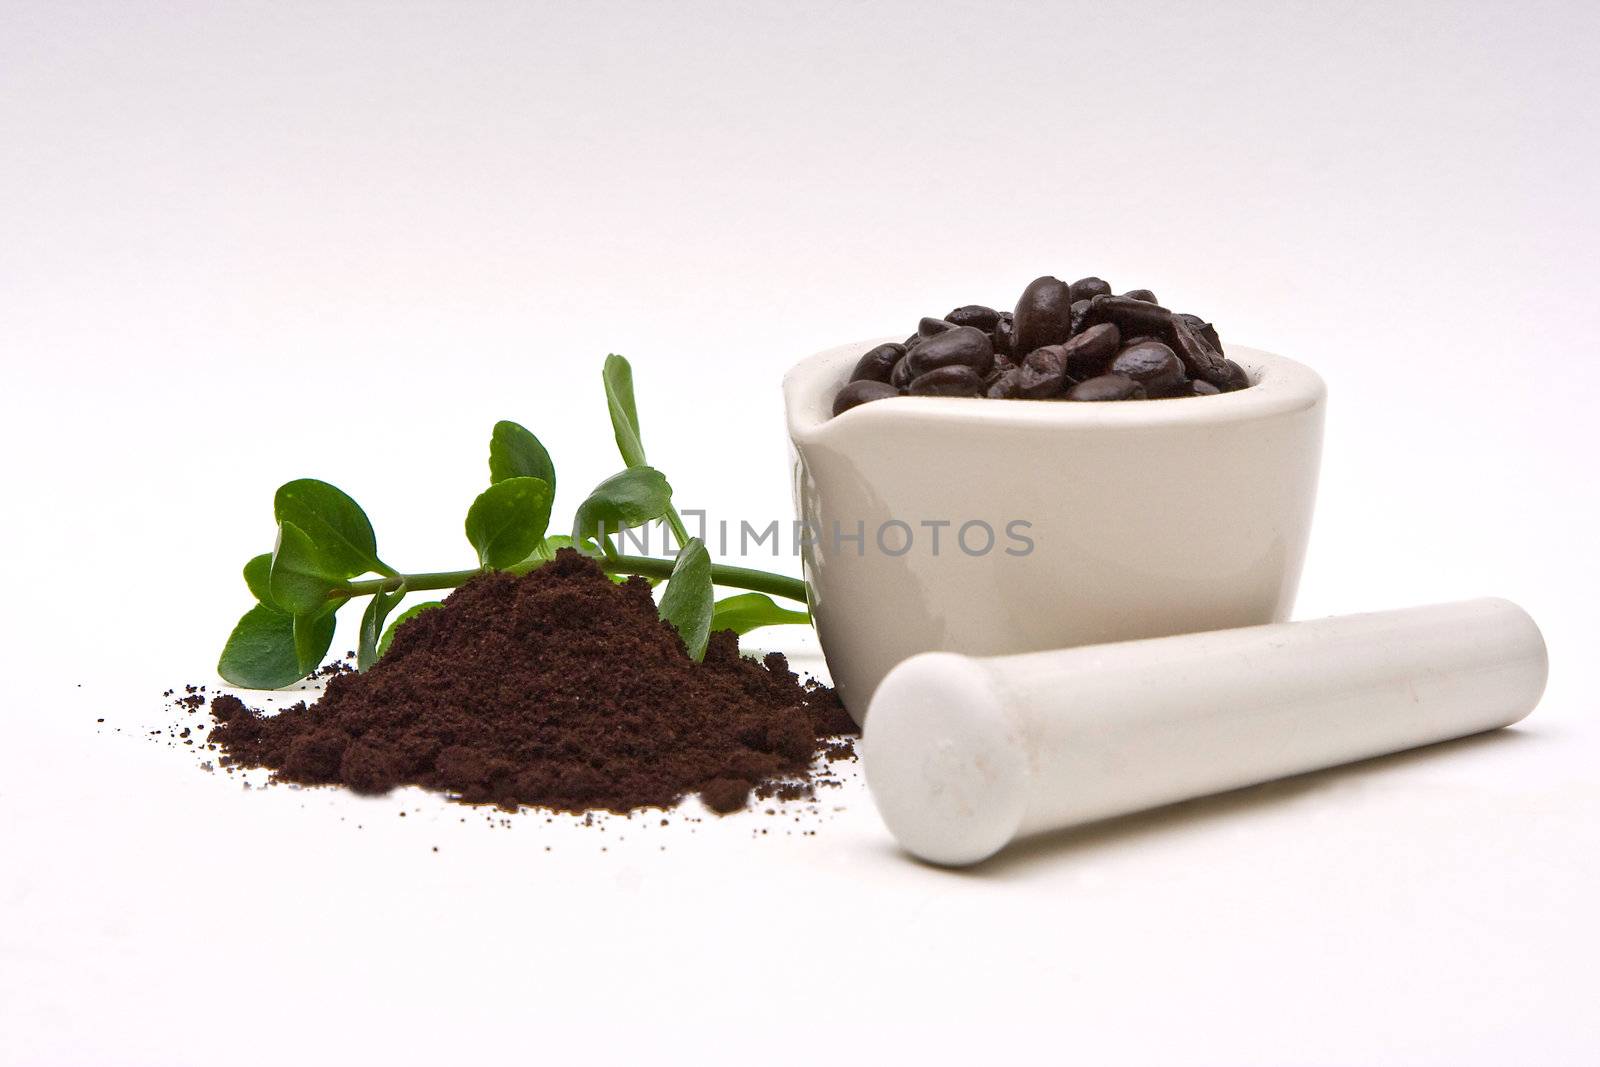 A mortar with freshly roasted coffee beans and a pile of coffee grind with some leaves in the back on a white background